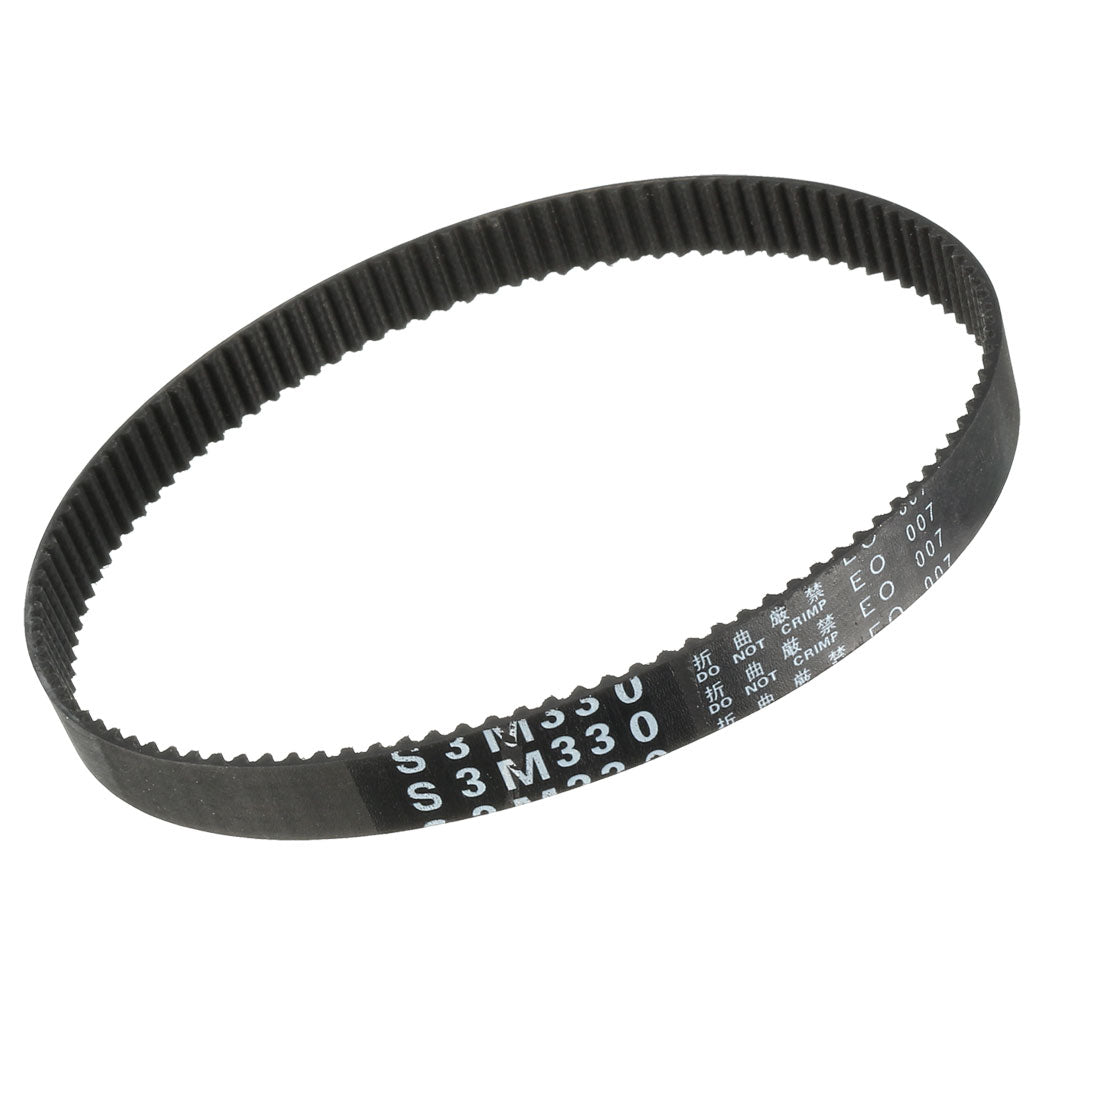 uxcell Uxcell S3M330 Rubber Timing Belt Synchronous Closed Loop Timing Belt Pulleys 10mm Width